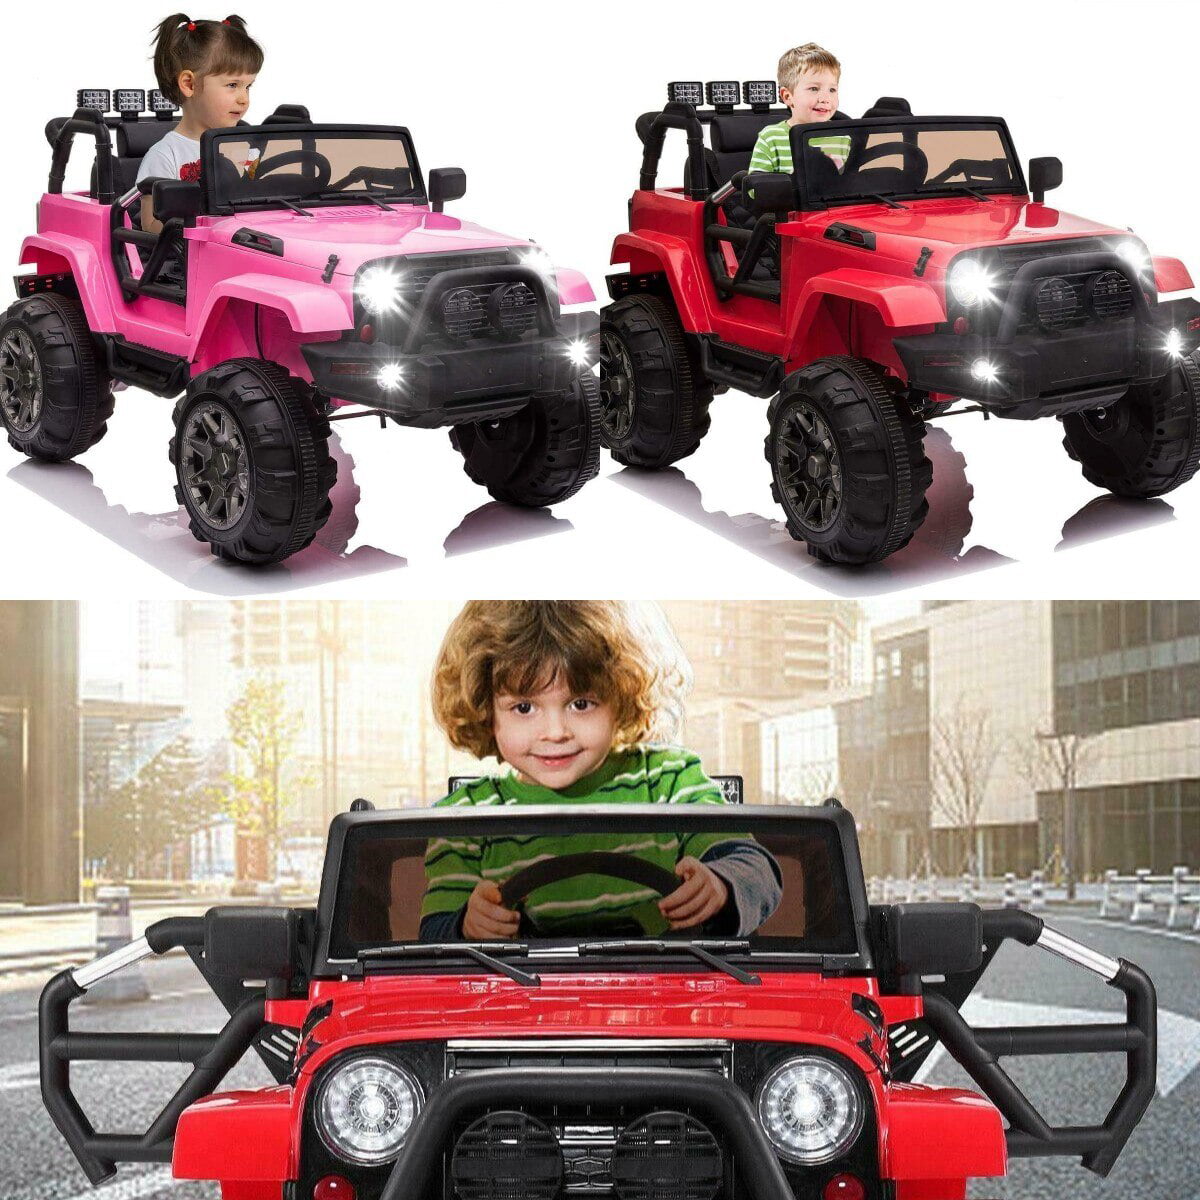 12V Pink Kids Ride on Car Truck Toys Electric 3 Speeds MP3 LED w/Remote Control 